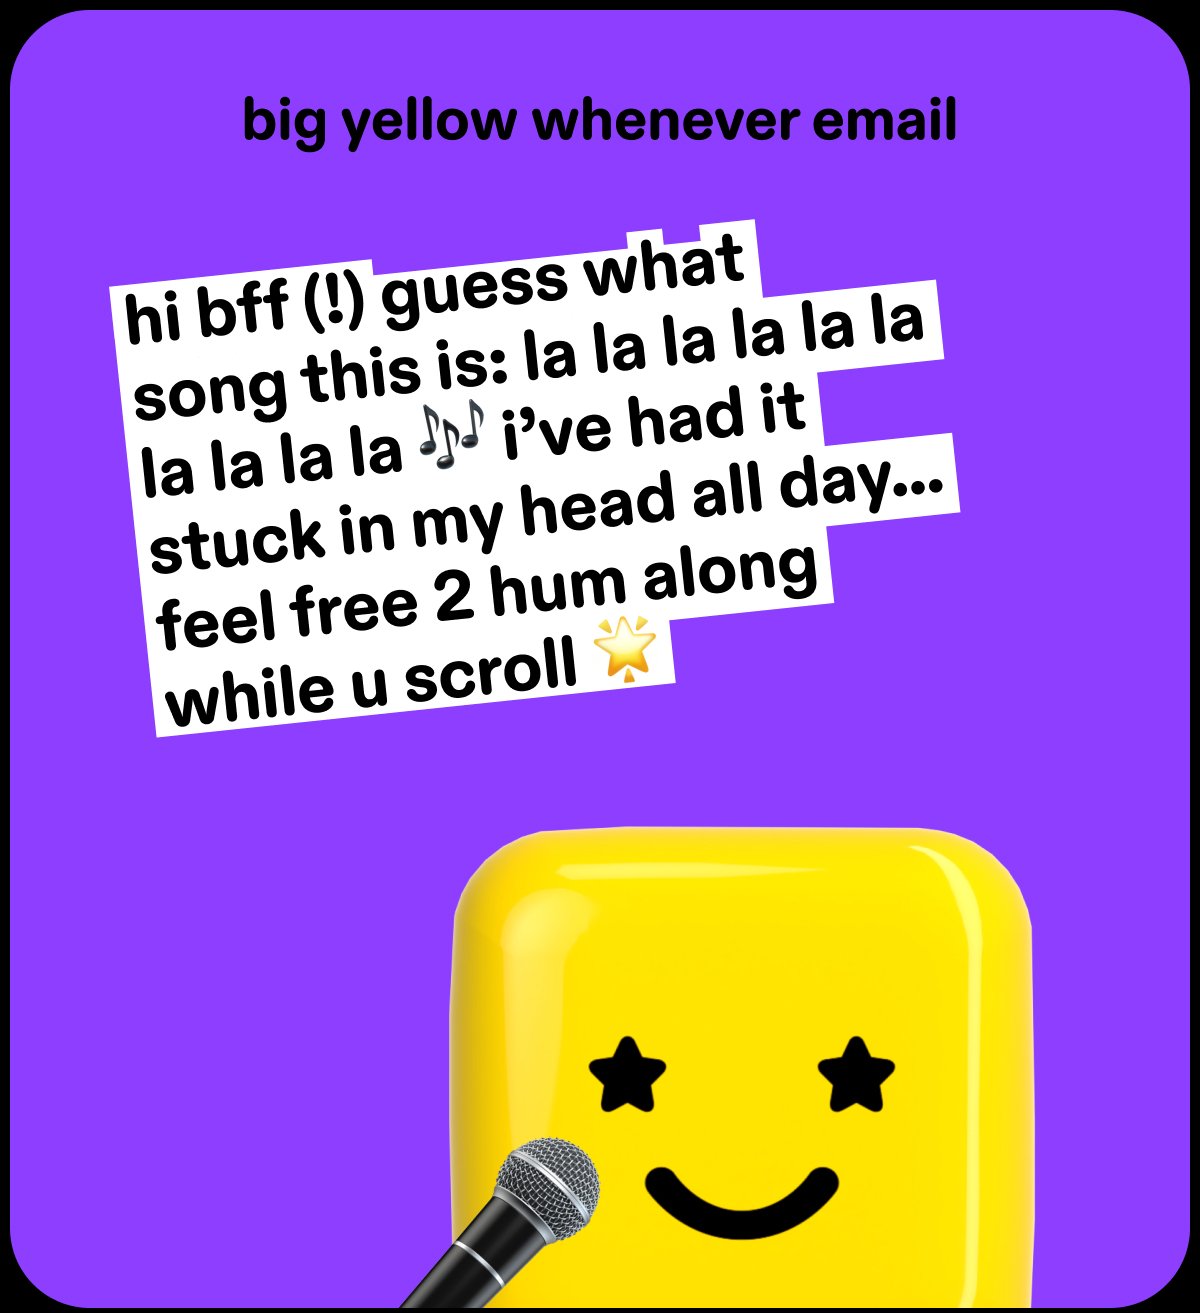 big yellow whenever email